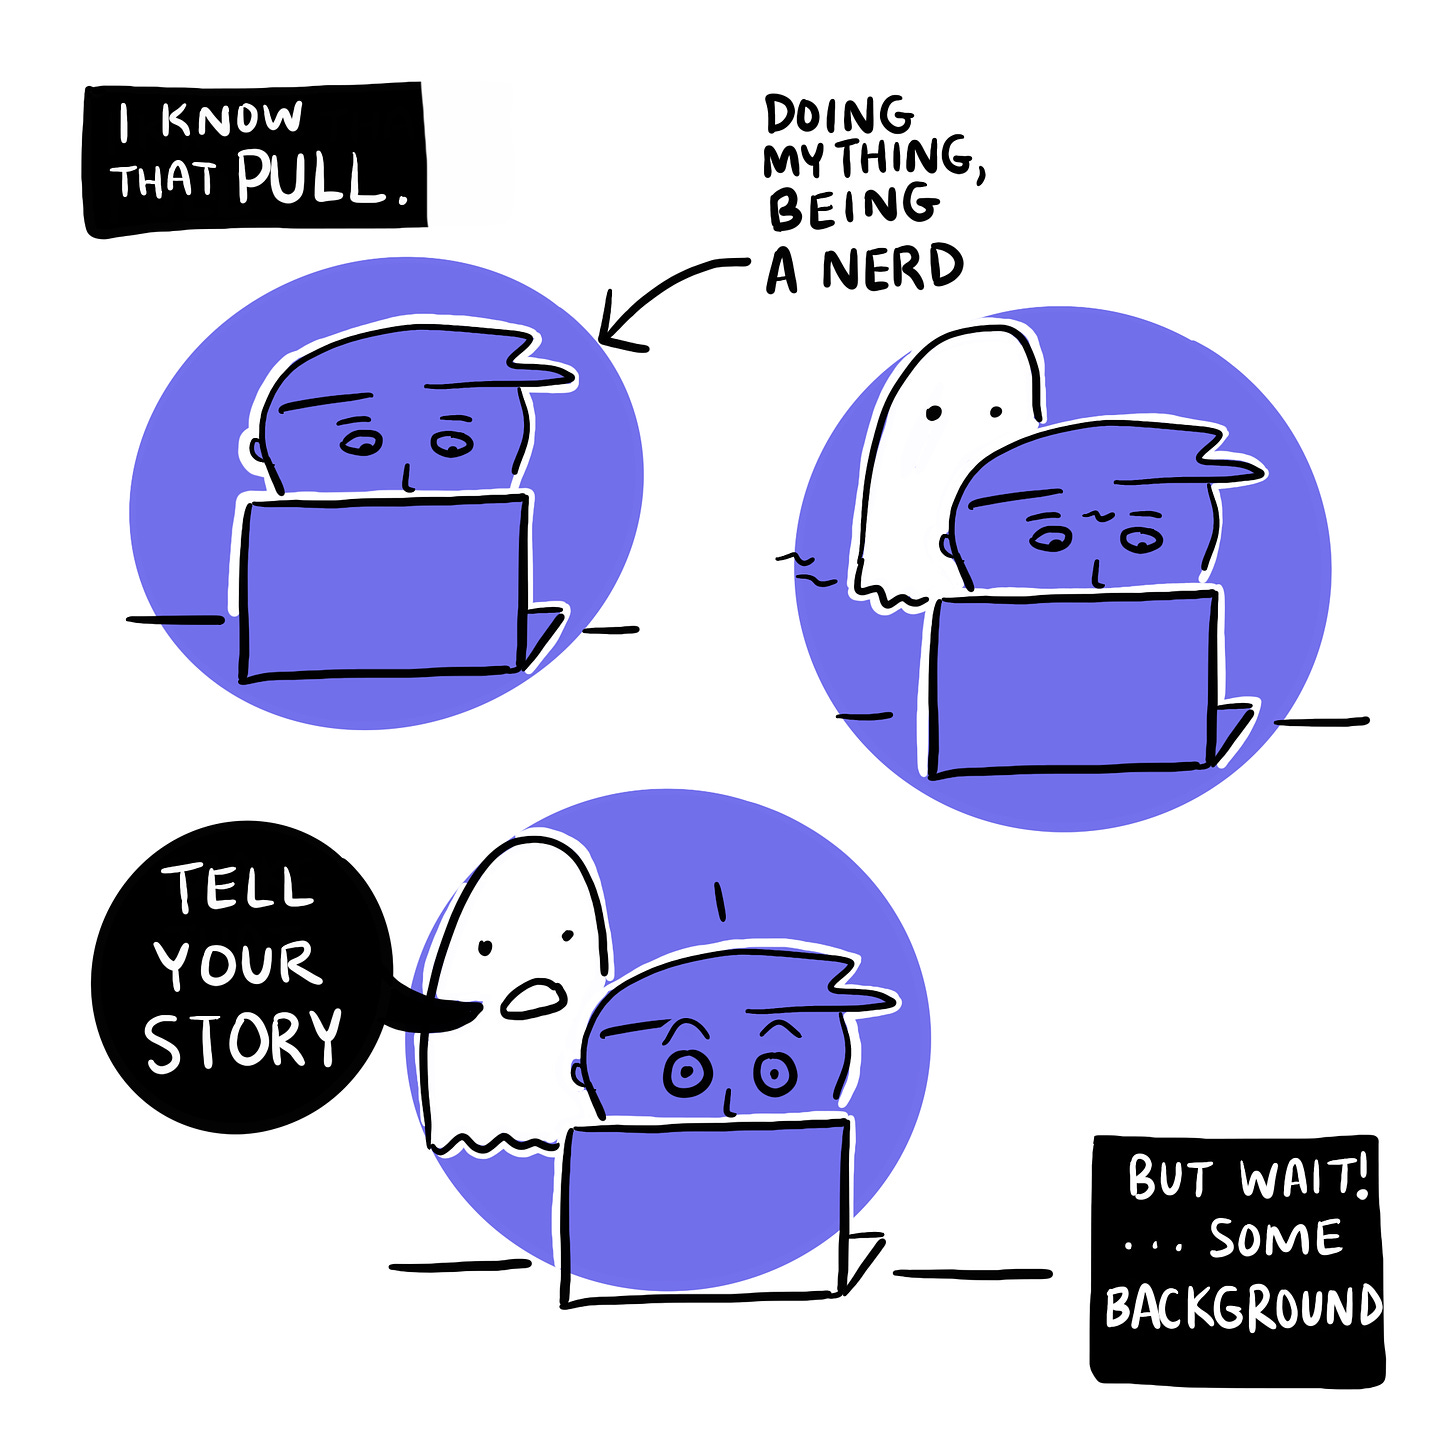 I know that pull. The cartoonist looking at their laptop, “doing my thing, being a nerd”. A ghost creeping up behind them, and saying “tell your story.” Narration box saying “but wait! Some background.